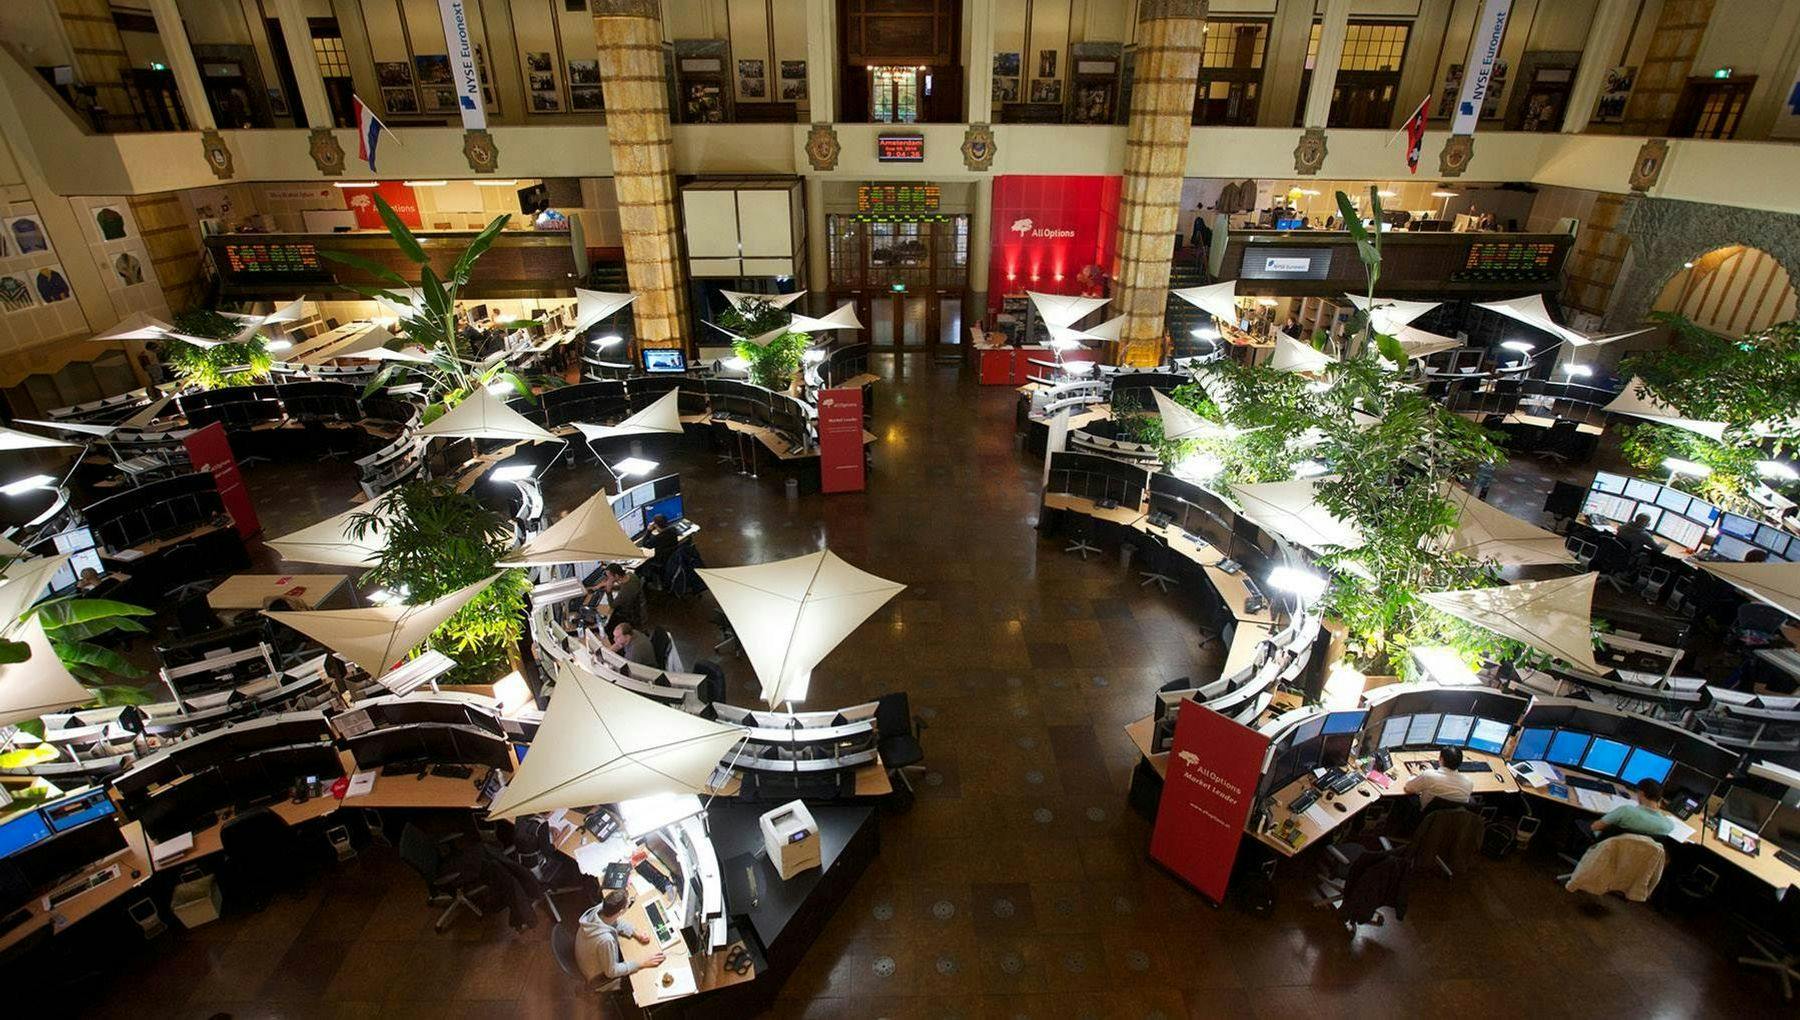 Bird's-eye view of a large stock exchange floor with multiple desks and computers.